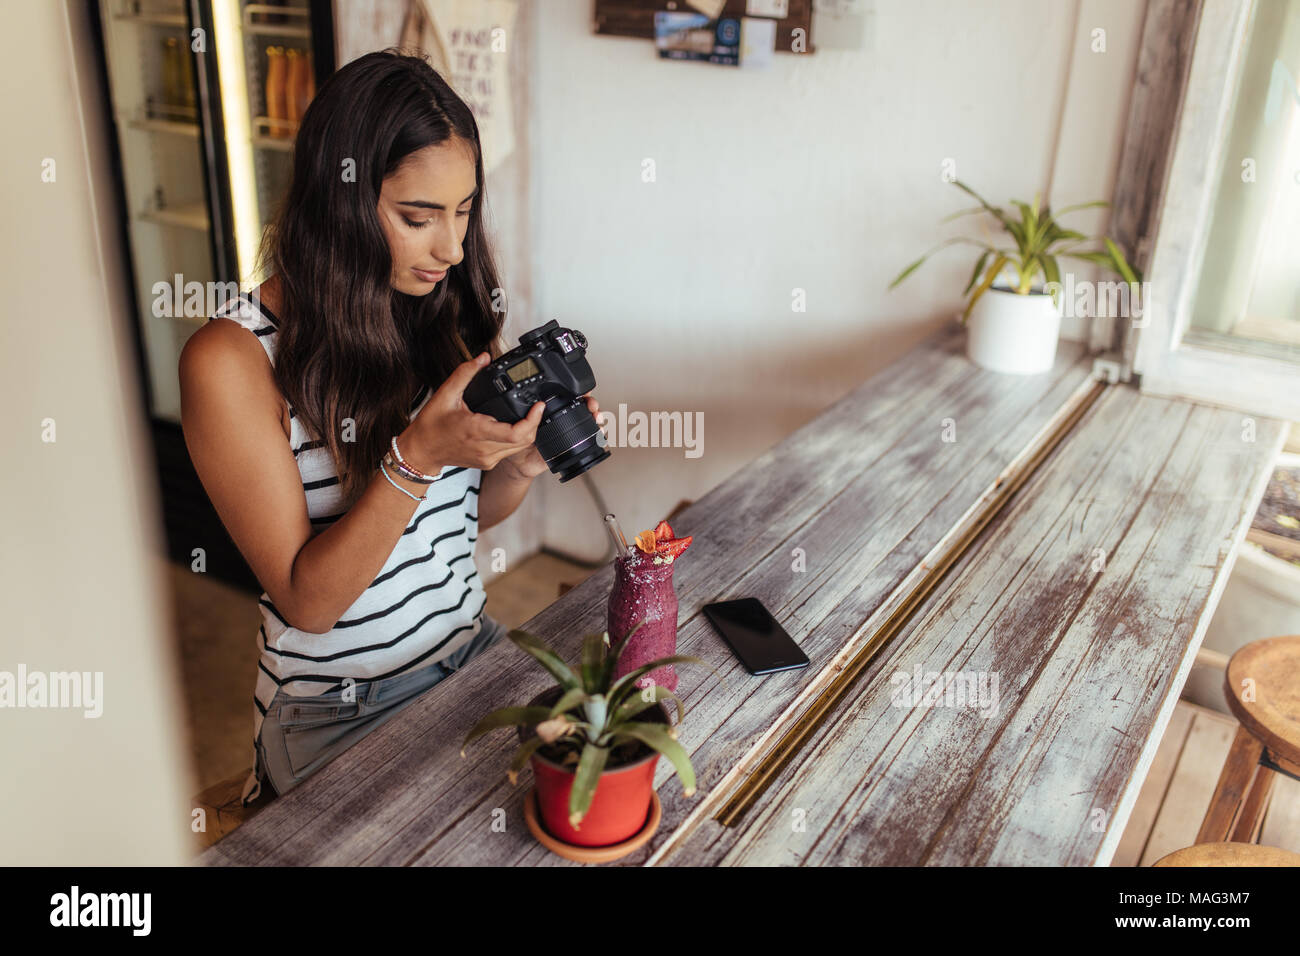 Woman taking photos of a smoothie placed beside a flower pot using a professional camera for her food blog. Food blogger shooting photos for her blog  Stock Photo